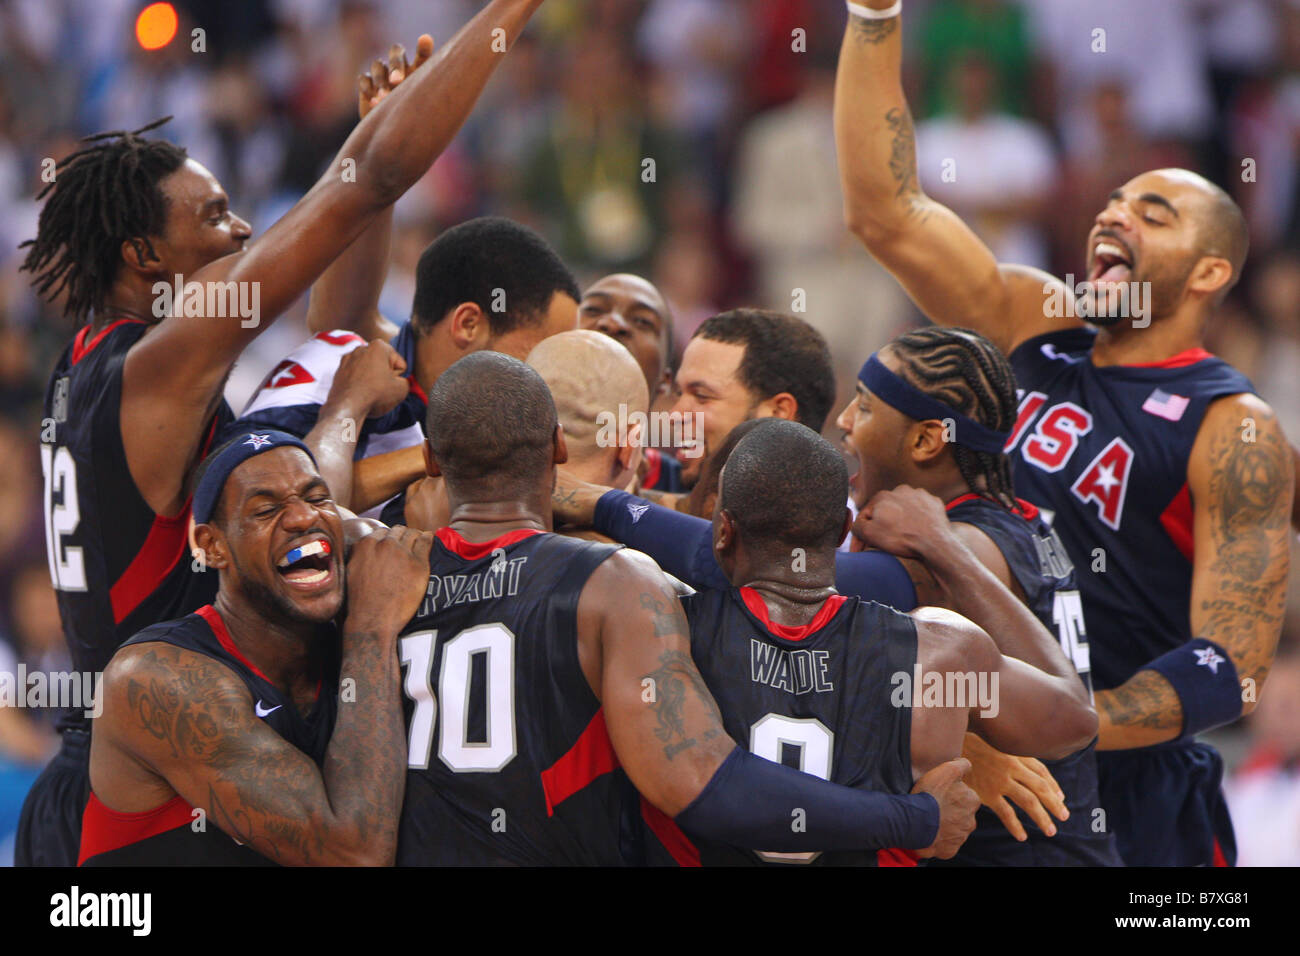 United States Team Group Usa August 24 08 Basketball Beijing 08 Olympic Games Mens Basketball Final Match Between United States And Spain At The Beijing Olympic Basketball Gymnasium In Beijing China Photo